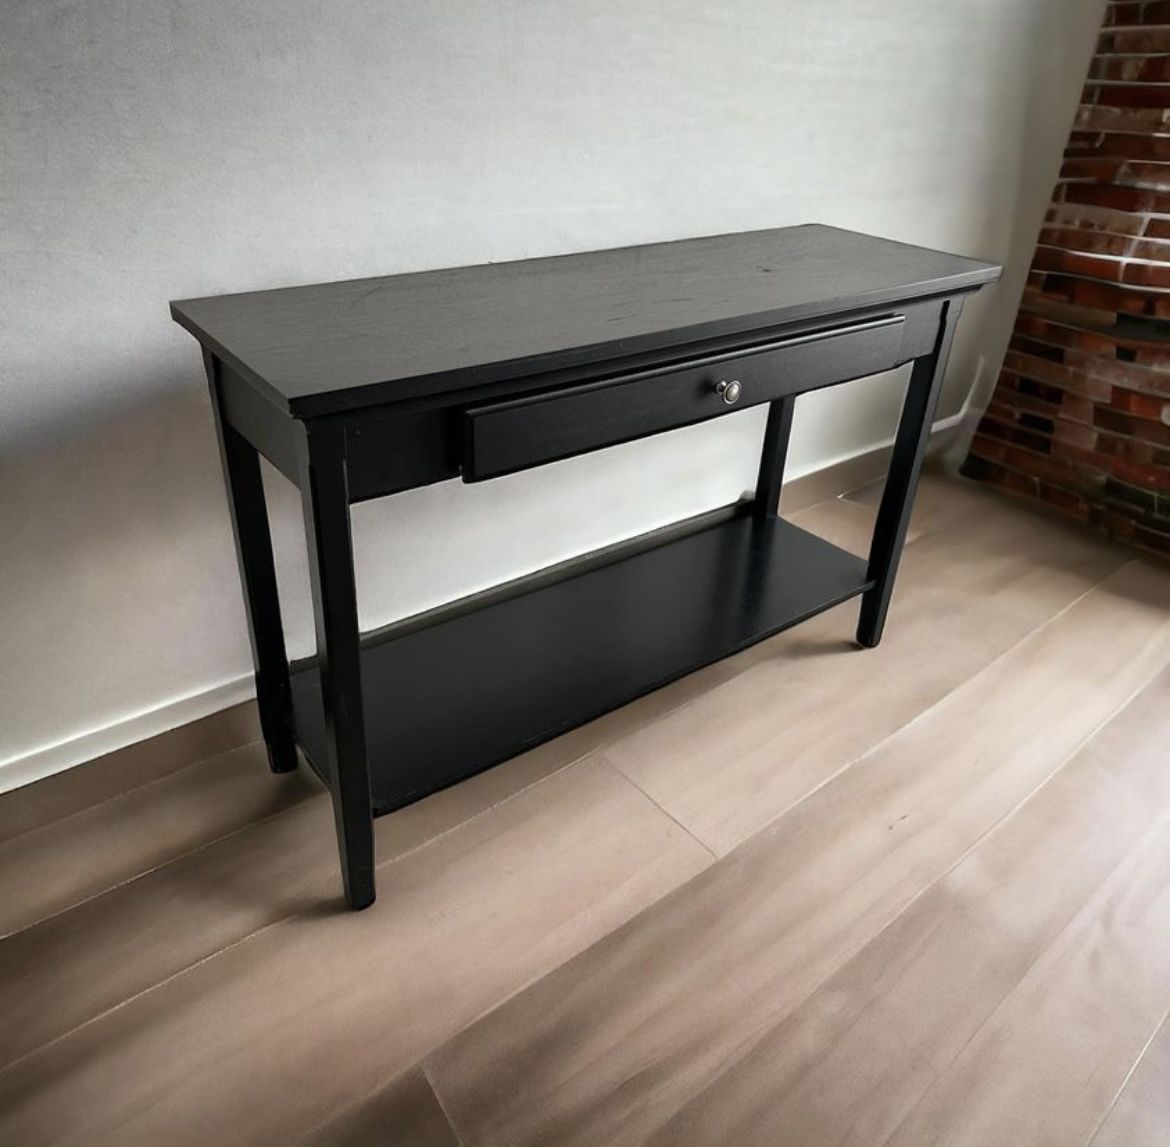 $50 for (1) Black Foyer Accent Entryway/Console Table - 47W x 16D x 30H